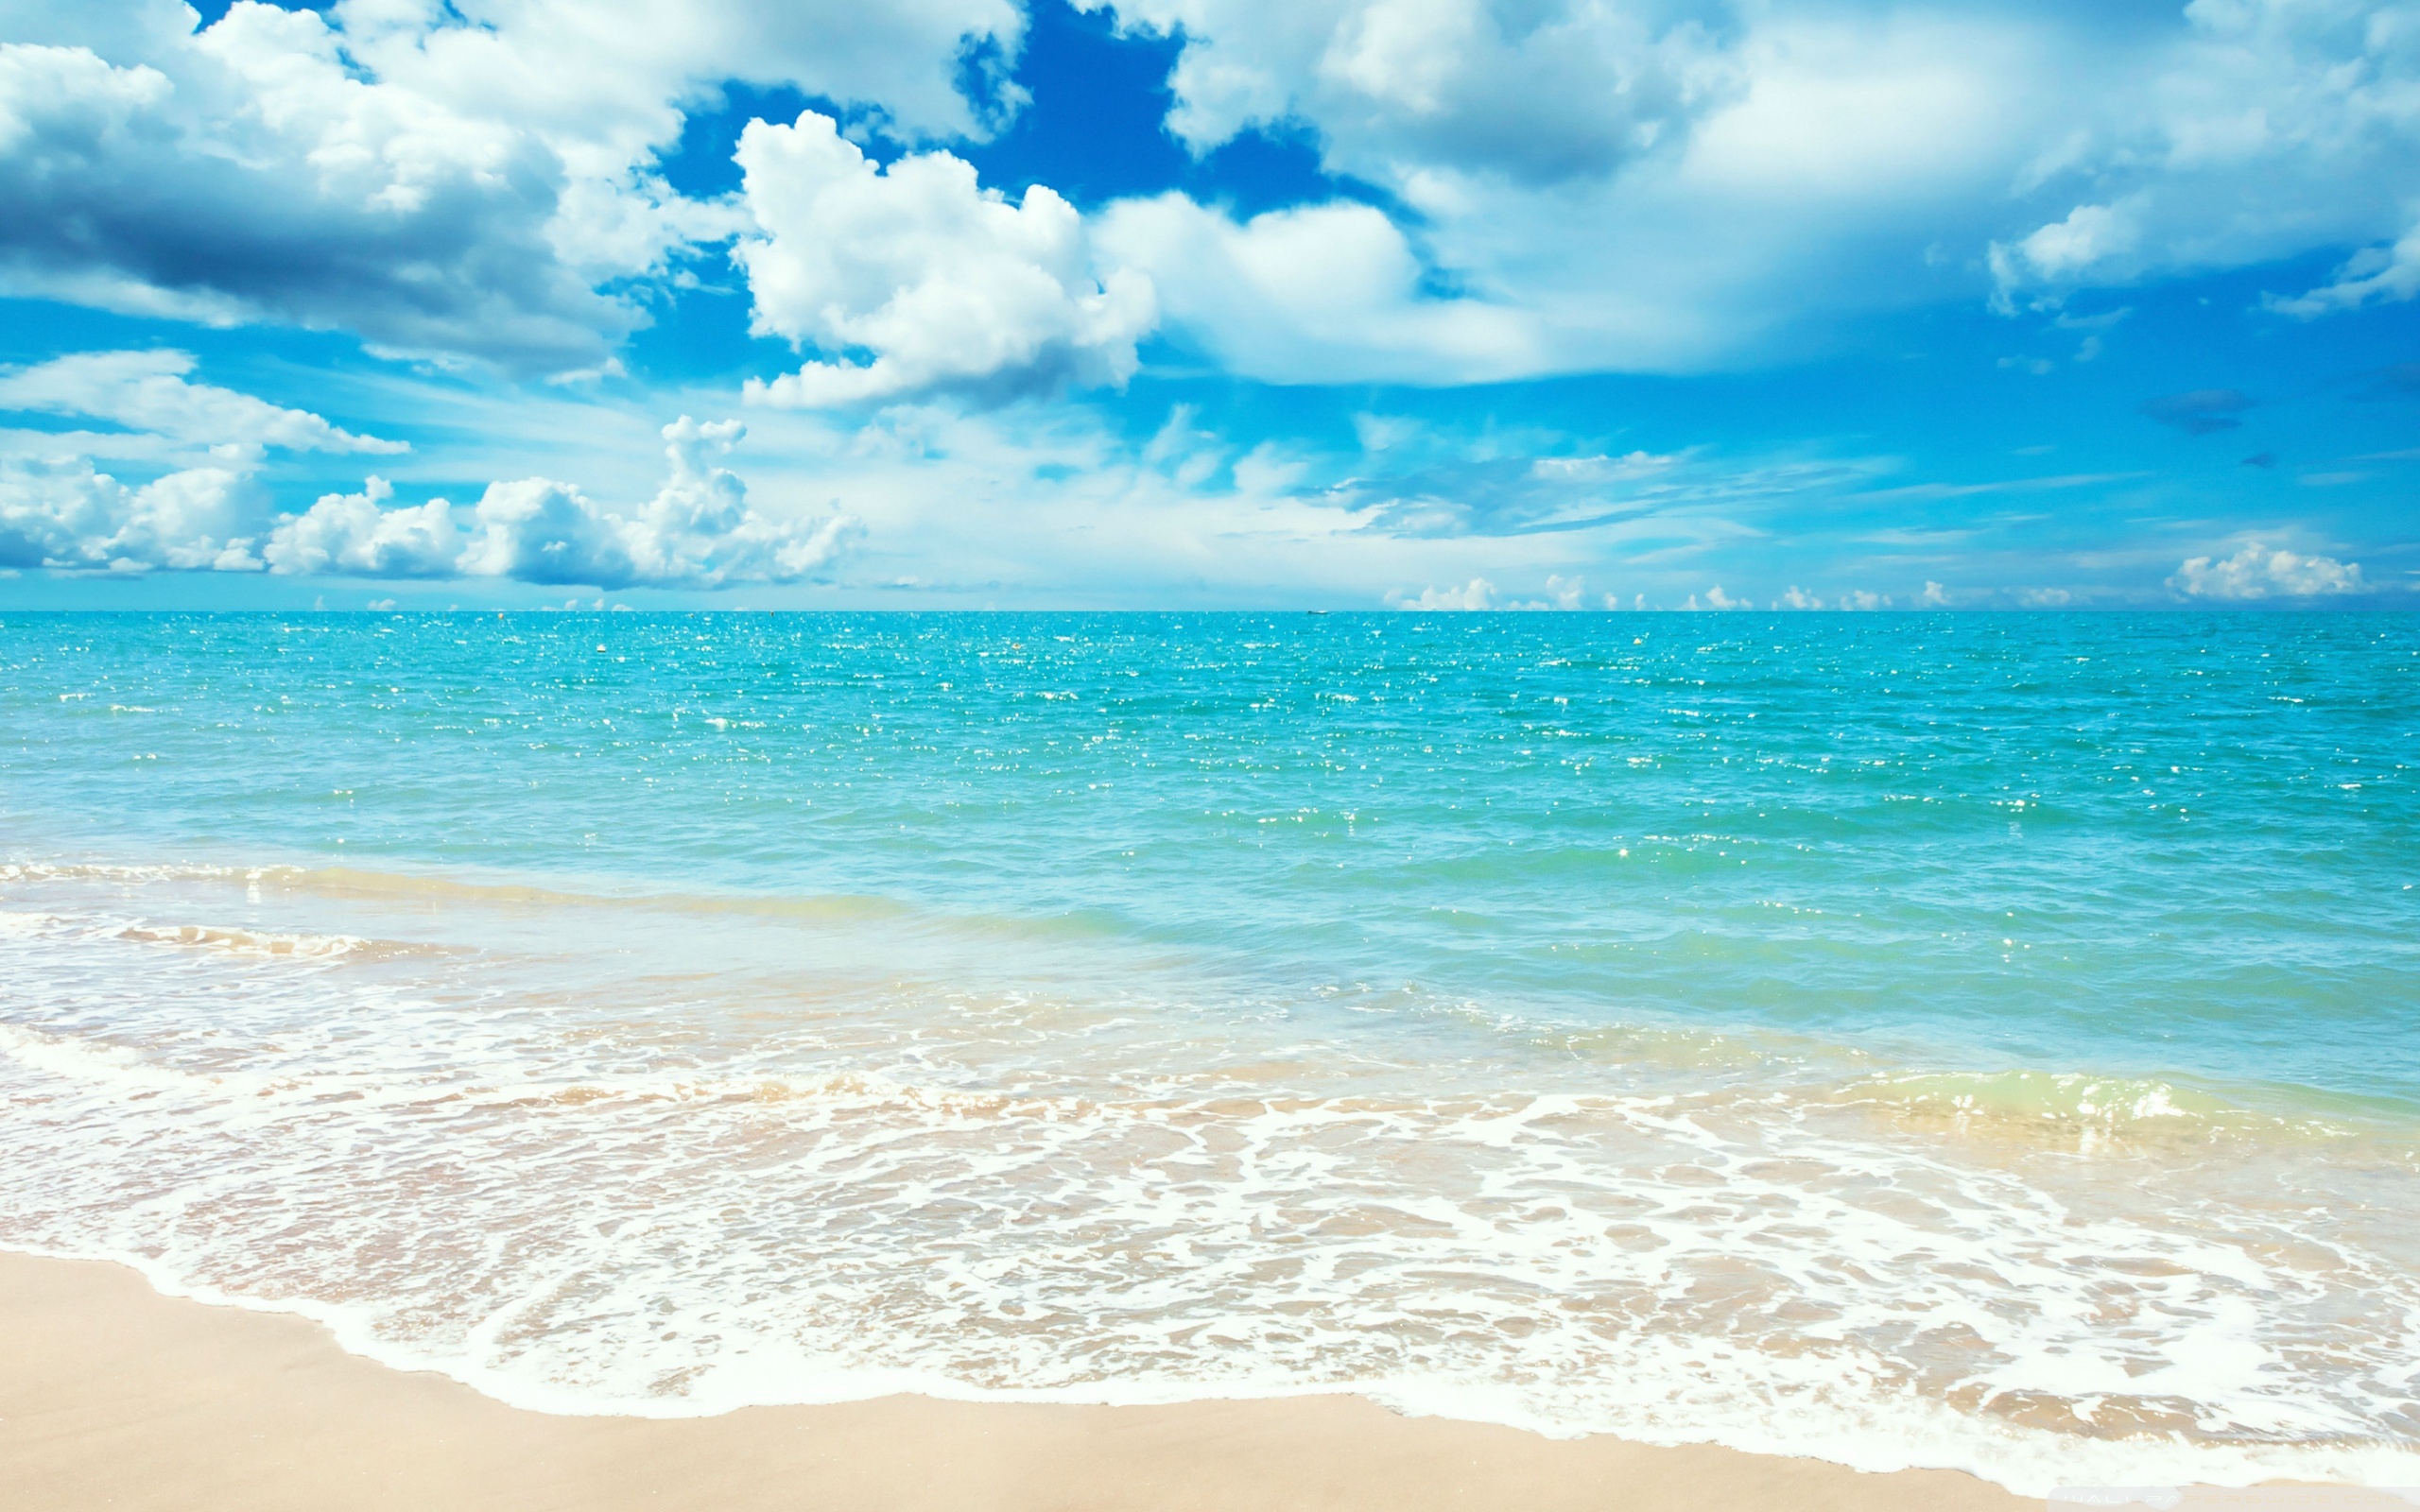 45 Beach Wallpaper For Mobile And Desktop In Full HD For 2560x1600